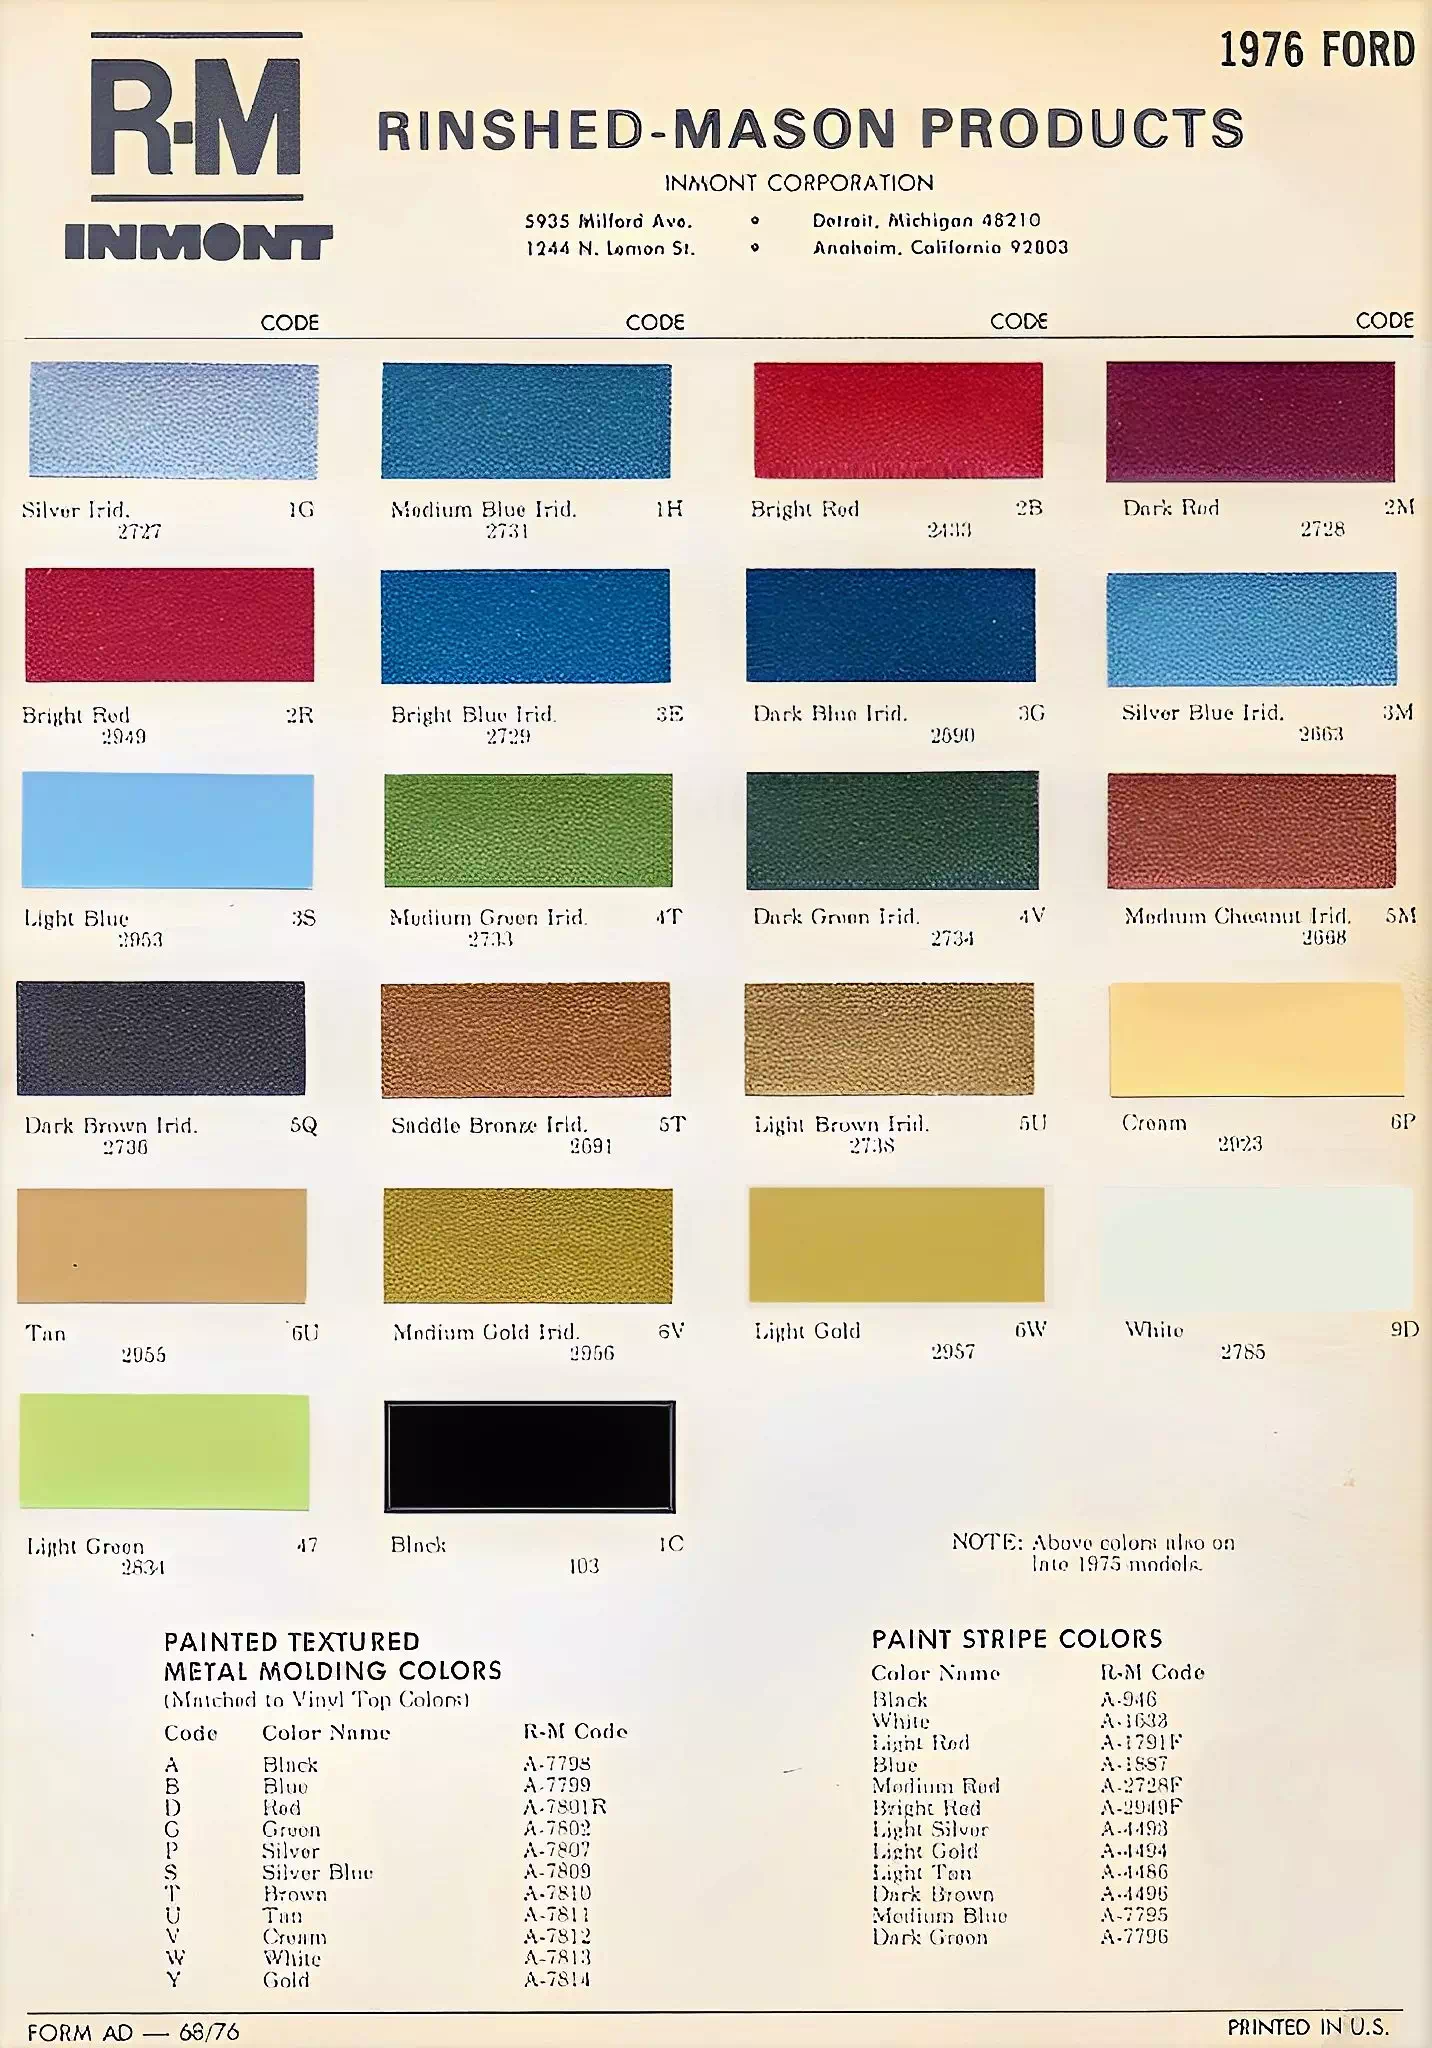 paint codes, paint chips, mixing stock numbers, metal moldings, and stripe colors used on Ford passenger automobiles in 1976